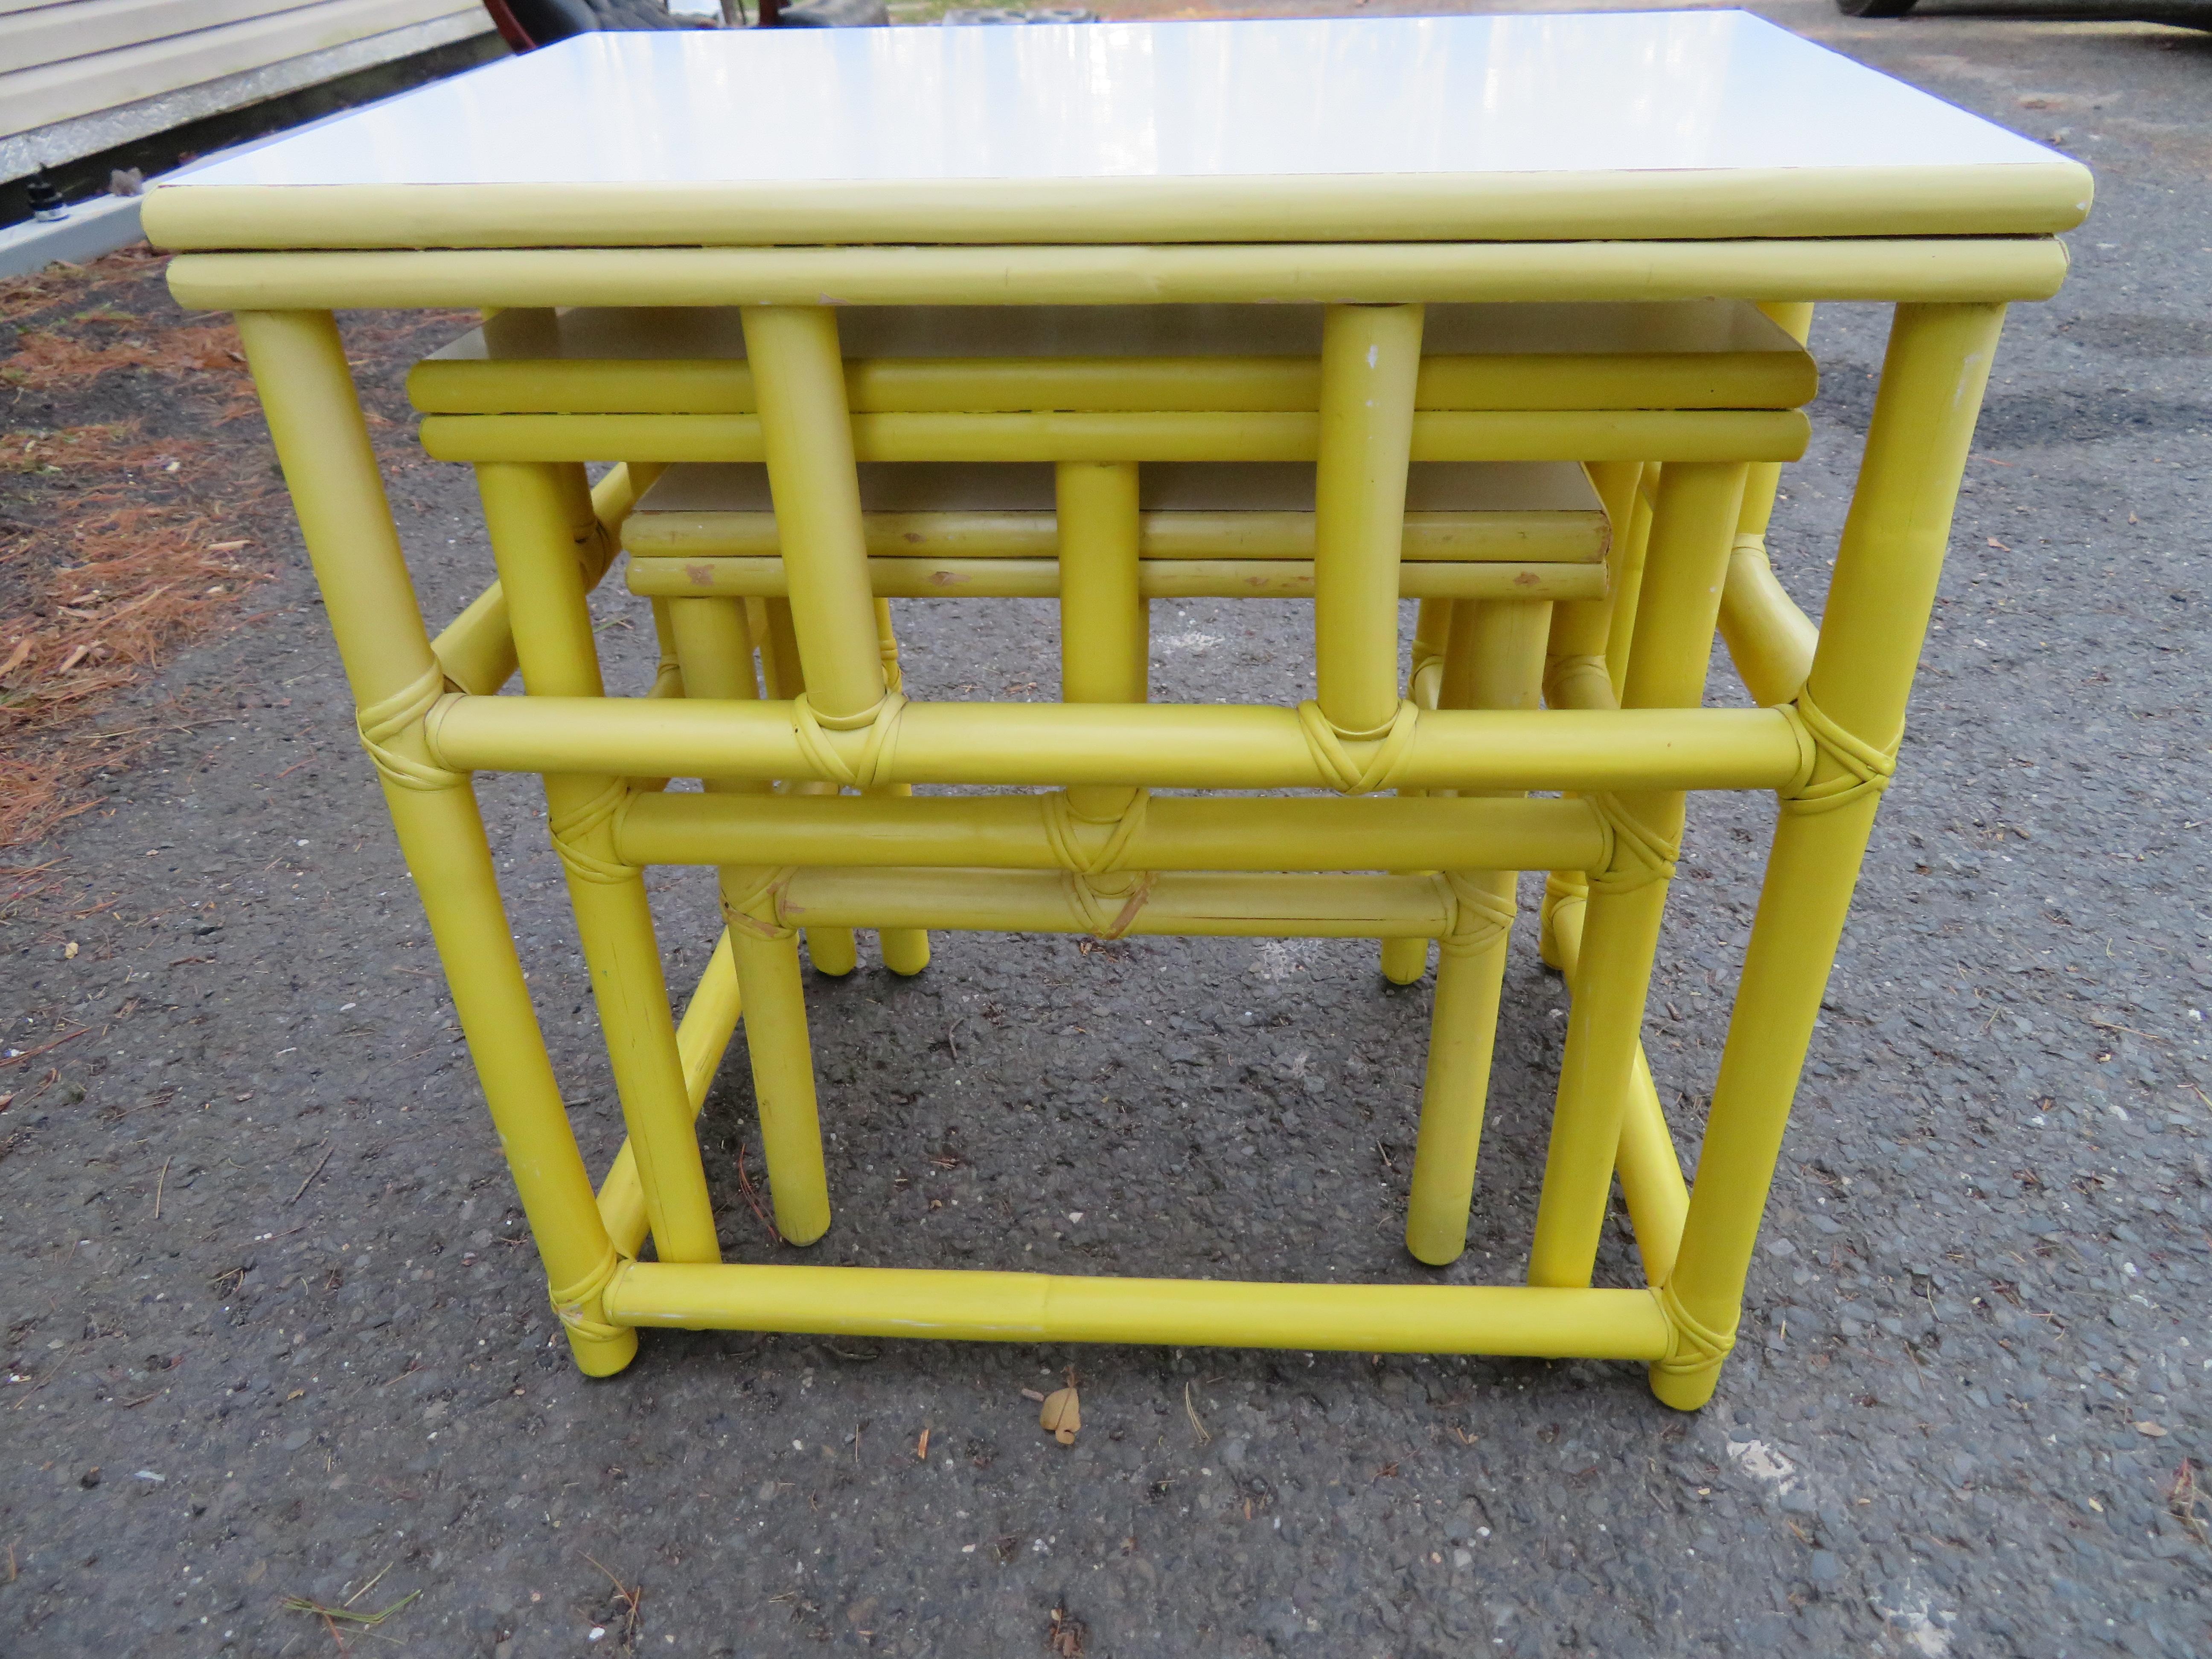 Darling Set of Yellow Rattan Stacking Nesting Tables Mid-Century Modern In Good Condition For Sale In Pemberton, NJ